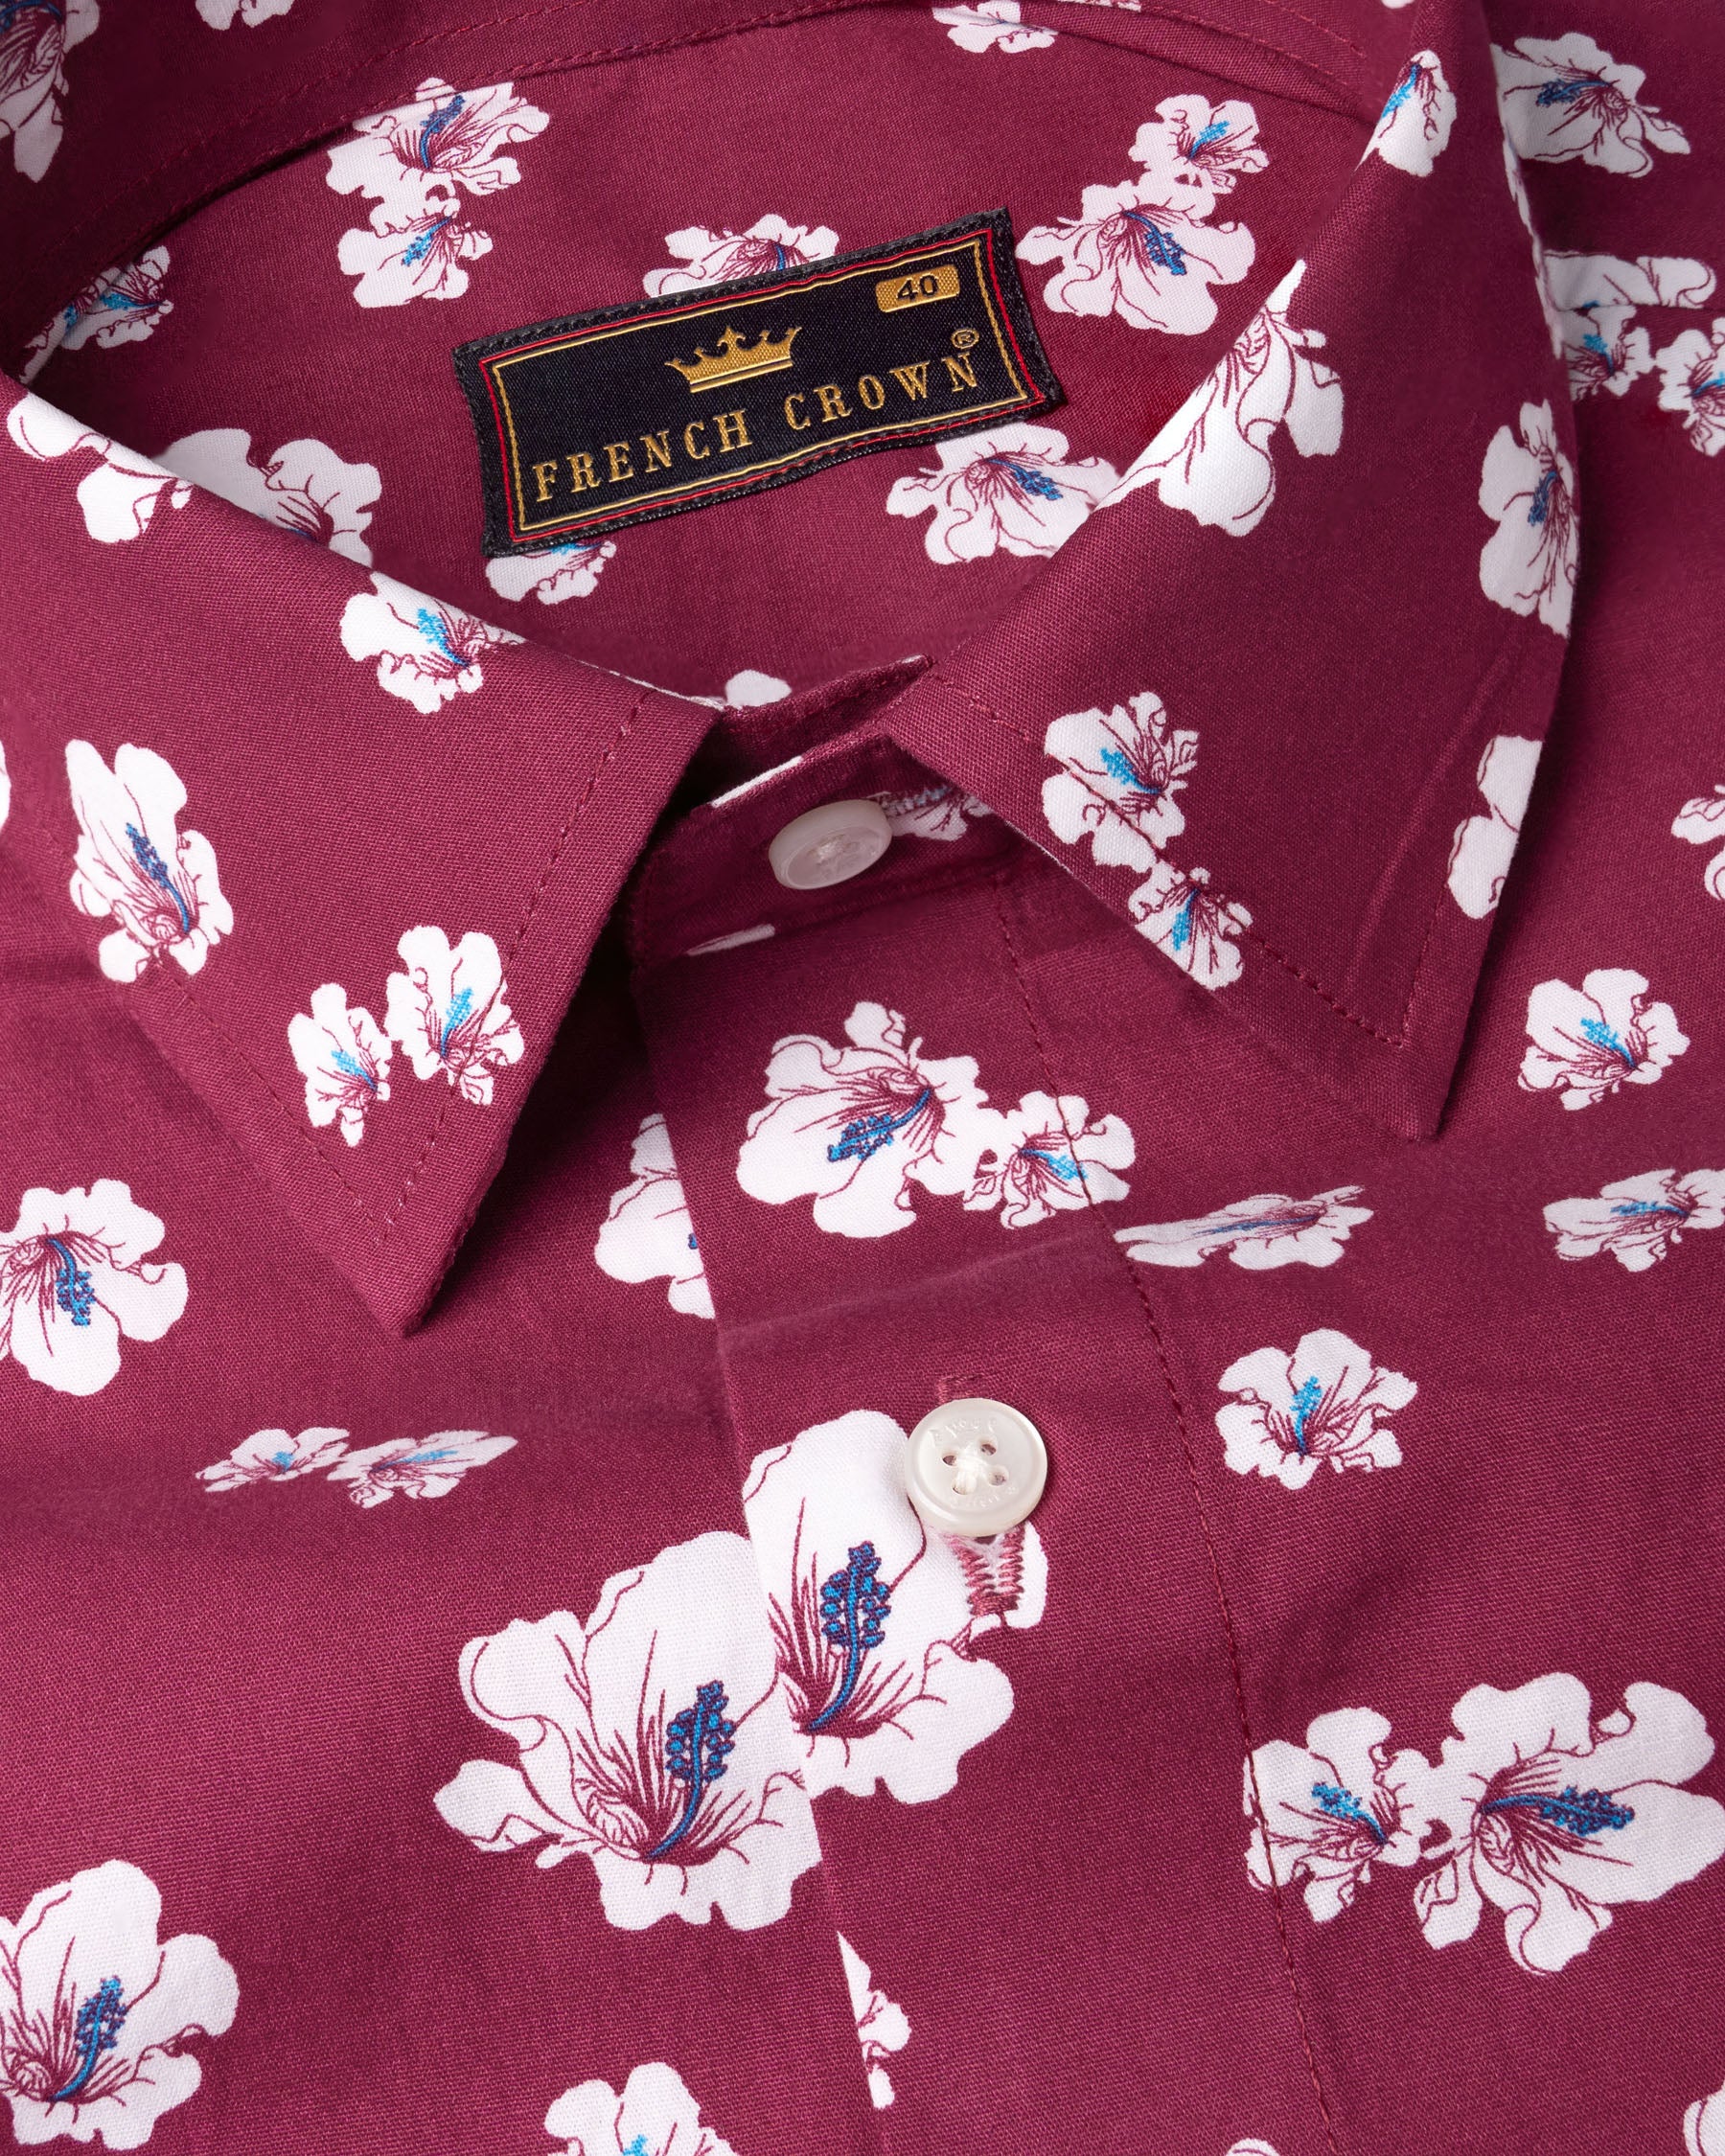 Camelot Red Floral Printed Twill Premium Cotton Shirt 6300-38, 6300-H-38, 6300-39, 6300-H-39, 6300-40, 6300-H-40, 6300-42, 6300-H-42, 6300-44, 6300-H-44, 6300-46, 6300-H-46, 6300-48, 6300-H-48, 6300-50, 6300-H-50, 6300-52, 6300-H-52